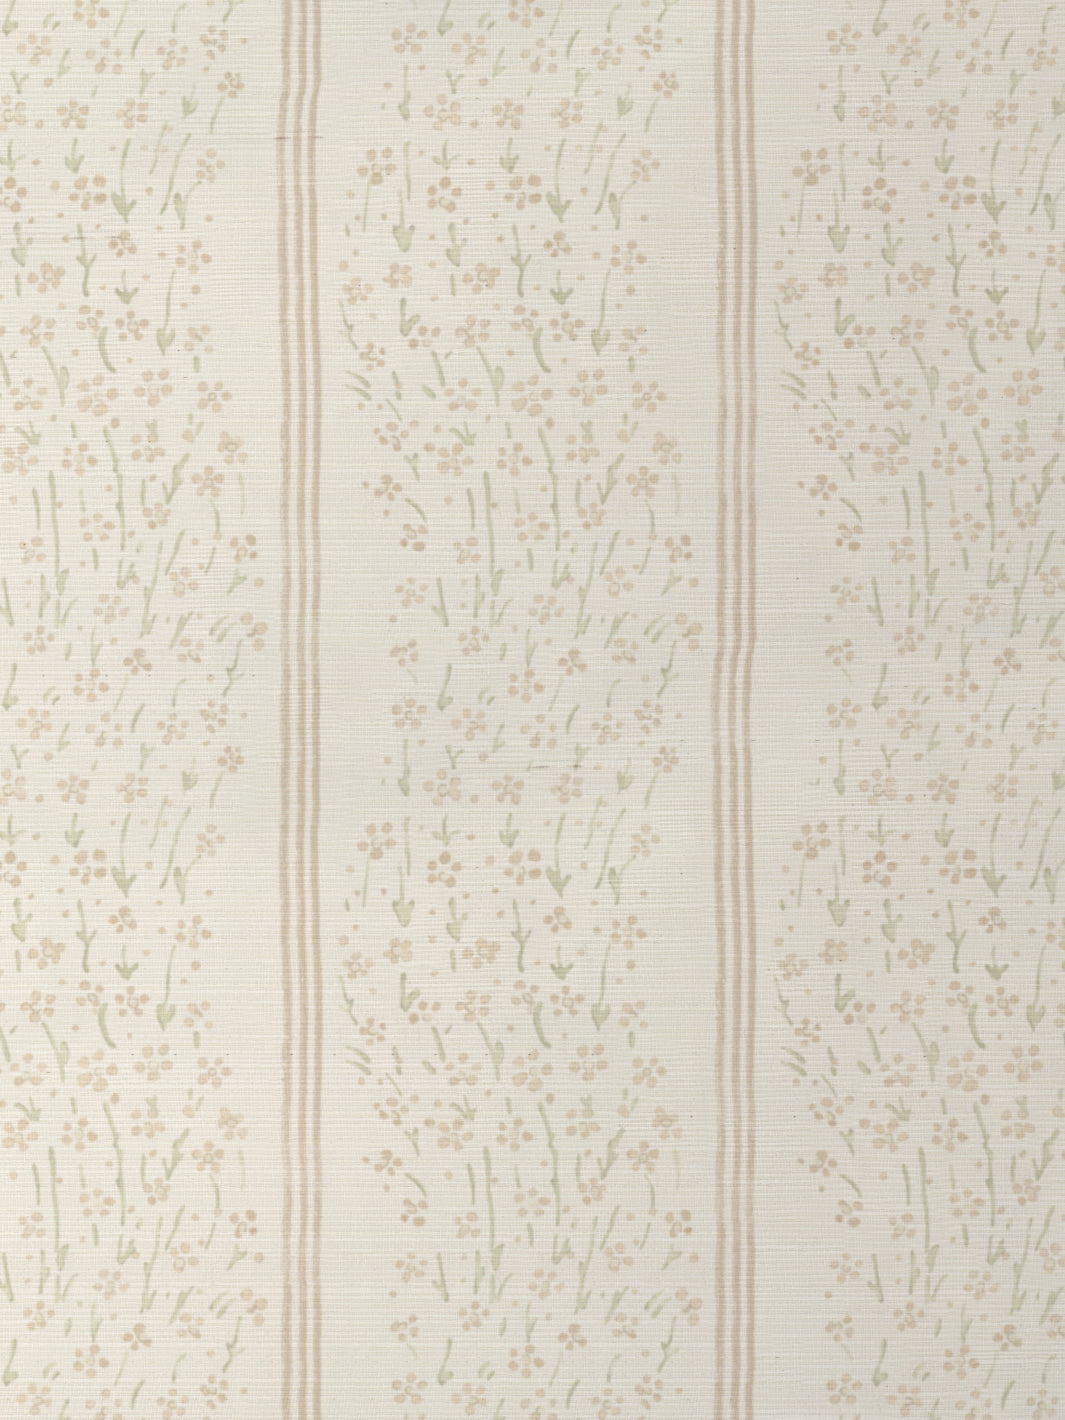 'Hillhouse Floral Ditsy Wave Stripe' Grasscloth Wallpaper by Nathan Turner - Gold Green